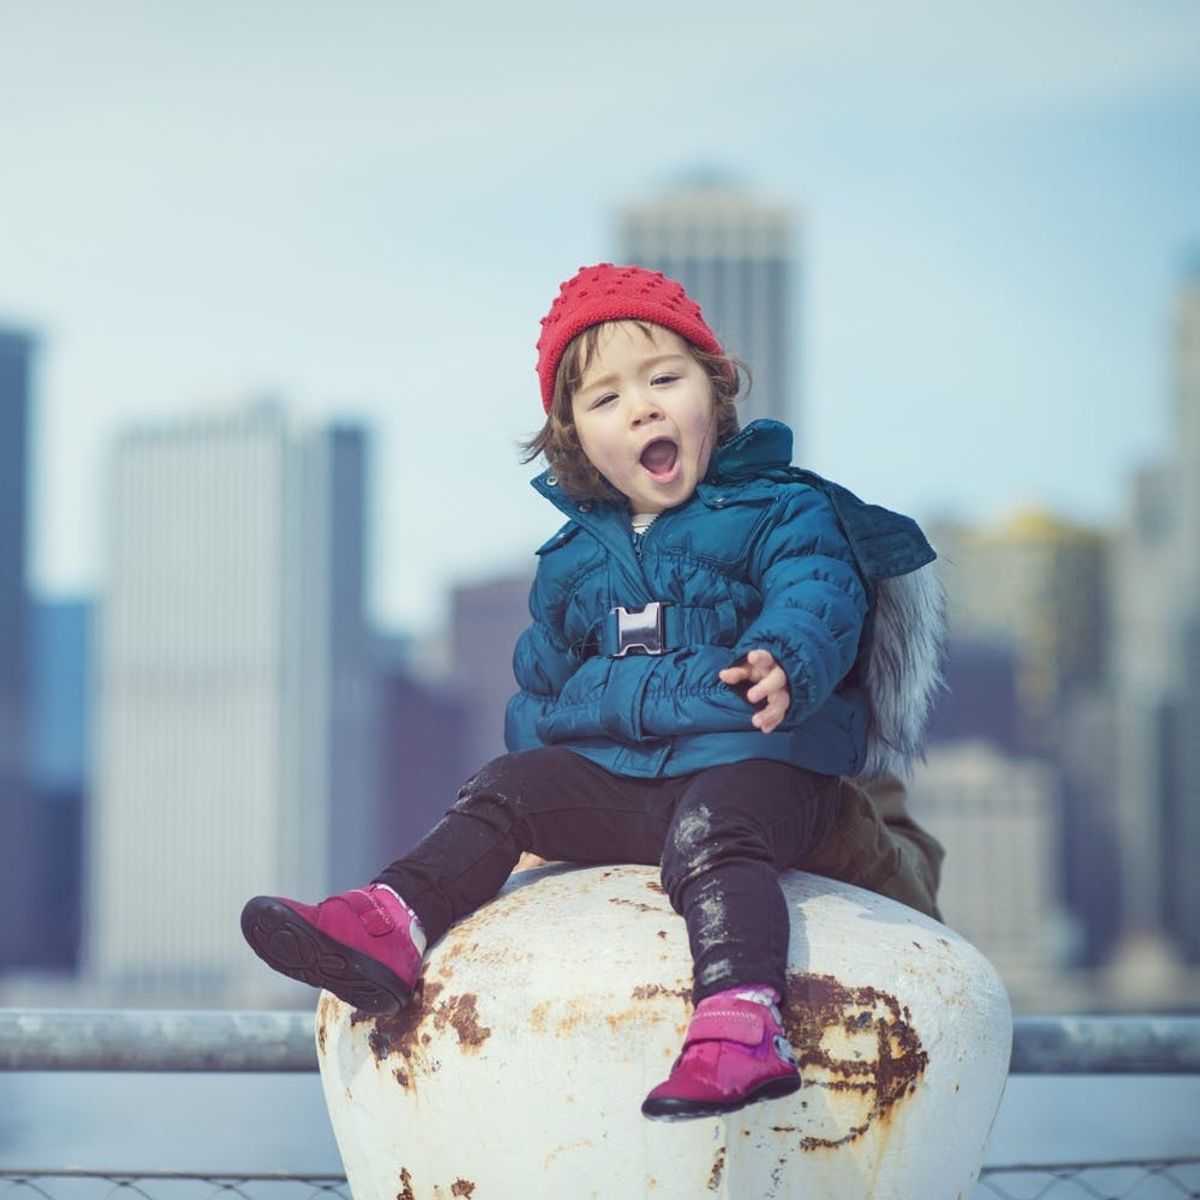 These Are the Top Baby Names in Major Cities Around the World